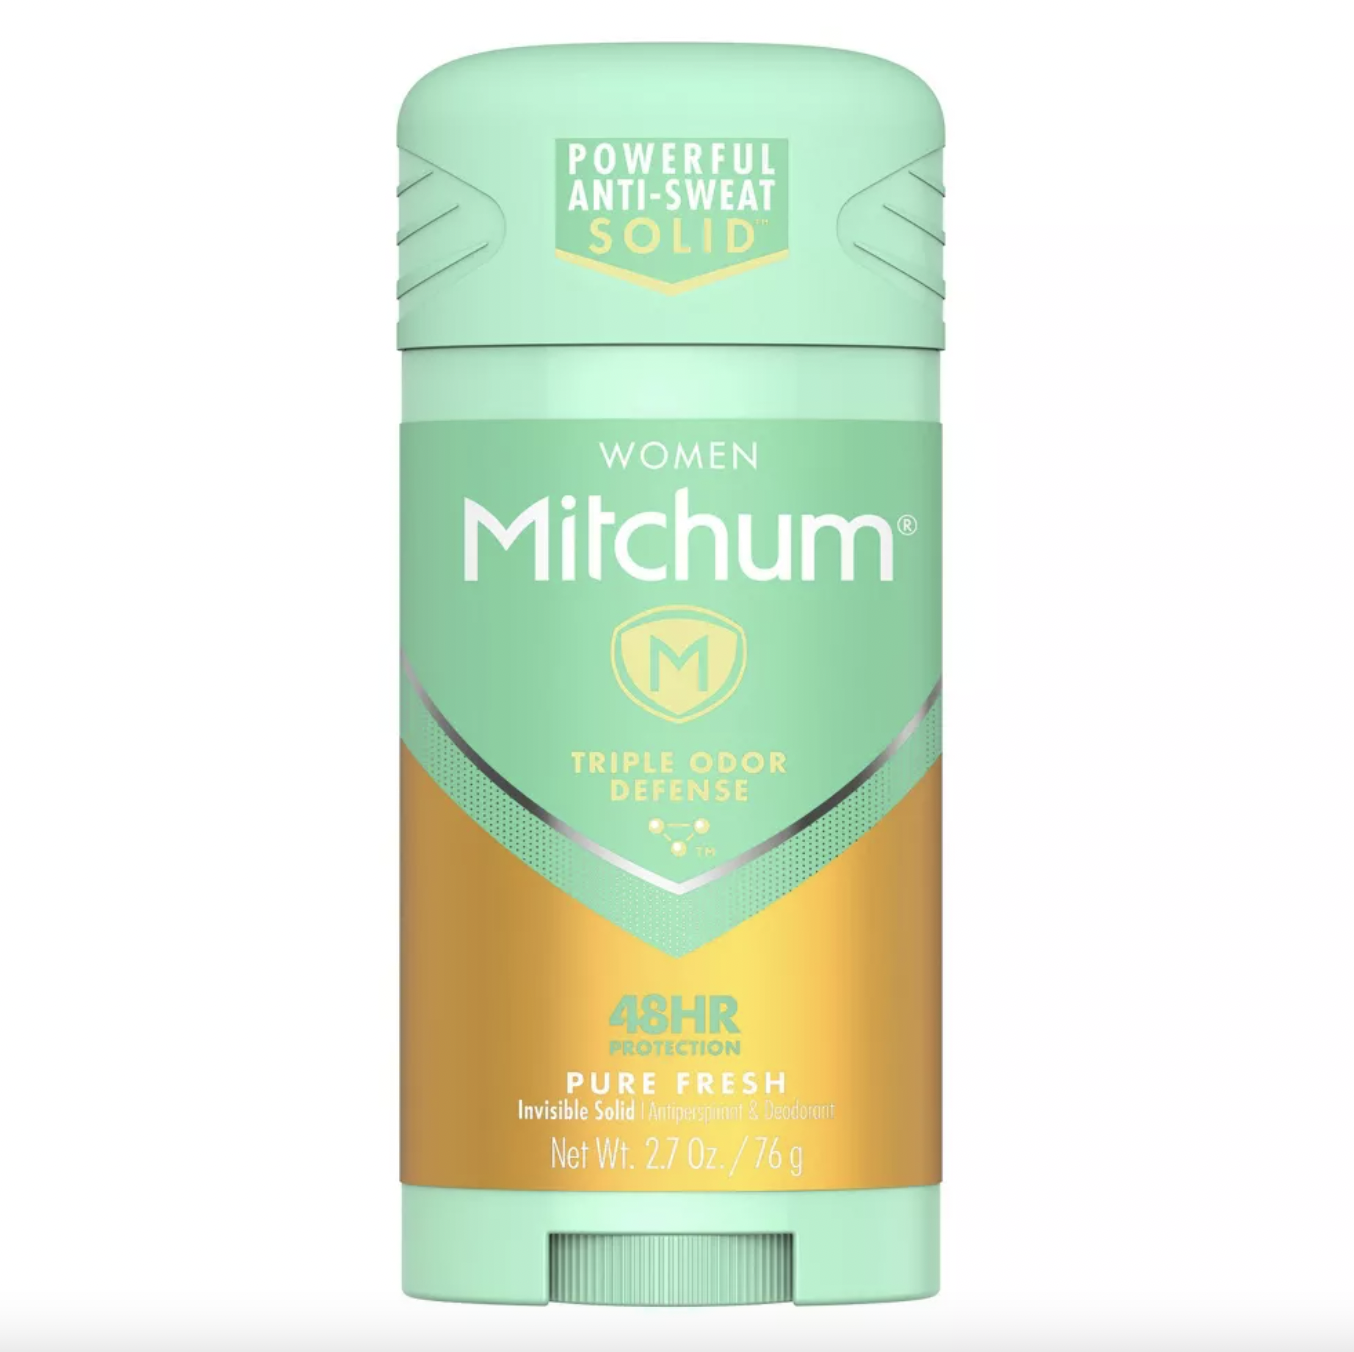 <p><strong>$4.79</strong></p><p><a href="https://go.redirectingat.com?id=74968X1553576&url=https%3A%2F%2Fwww.target.com%2Fp%2Fmitchum-women-s-advanced-control-anti-perspirant-deodorant-pure-fresh-2-7-oz%2F-%2FA-13197323&sref=https%3A%2F%2Fwww.harpersbazaar.com%2Fbeauty%2Fhealth%2Fg60141967%2Fbest-deodorant-brands%2F">Shop Now</a></p><p>Anyone who has tried Mitchum Advanced Control Antiperspirant & Deodorant Stick knows it's no joke. With the strongest aluminum concentration and triple odor defense that works against heat, stress, and motion, it's the kind of stick that still holds over the next day if you're running out the door and forget to swipe.</p><p><strong>Customer Review:</strong></p><p>"My armpits are usually sensitive and recently due to my pregnancy I have sweated more and my odor is stronger so I decided to try this and it’s amazing!!! Very satisfied and surprised. Love it. I definitely recommend" —Diana F</p>